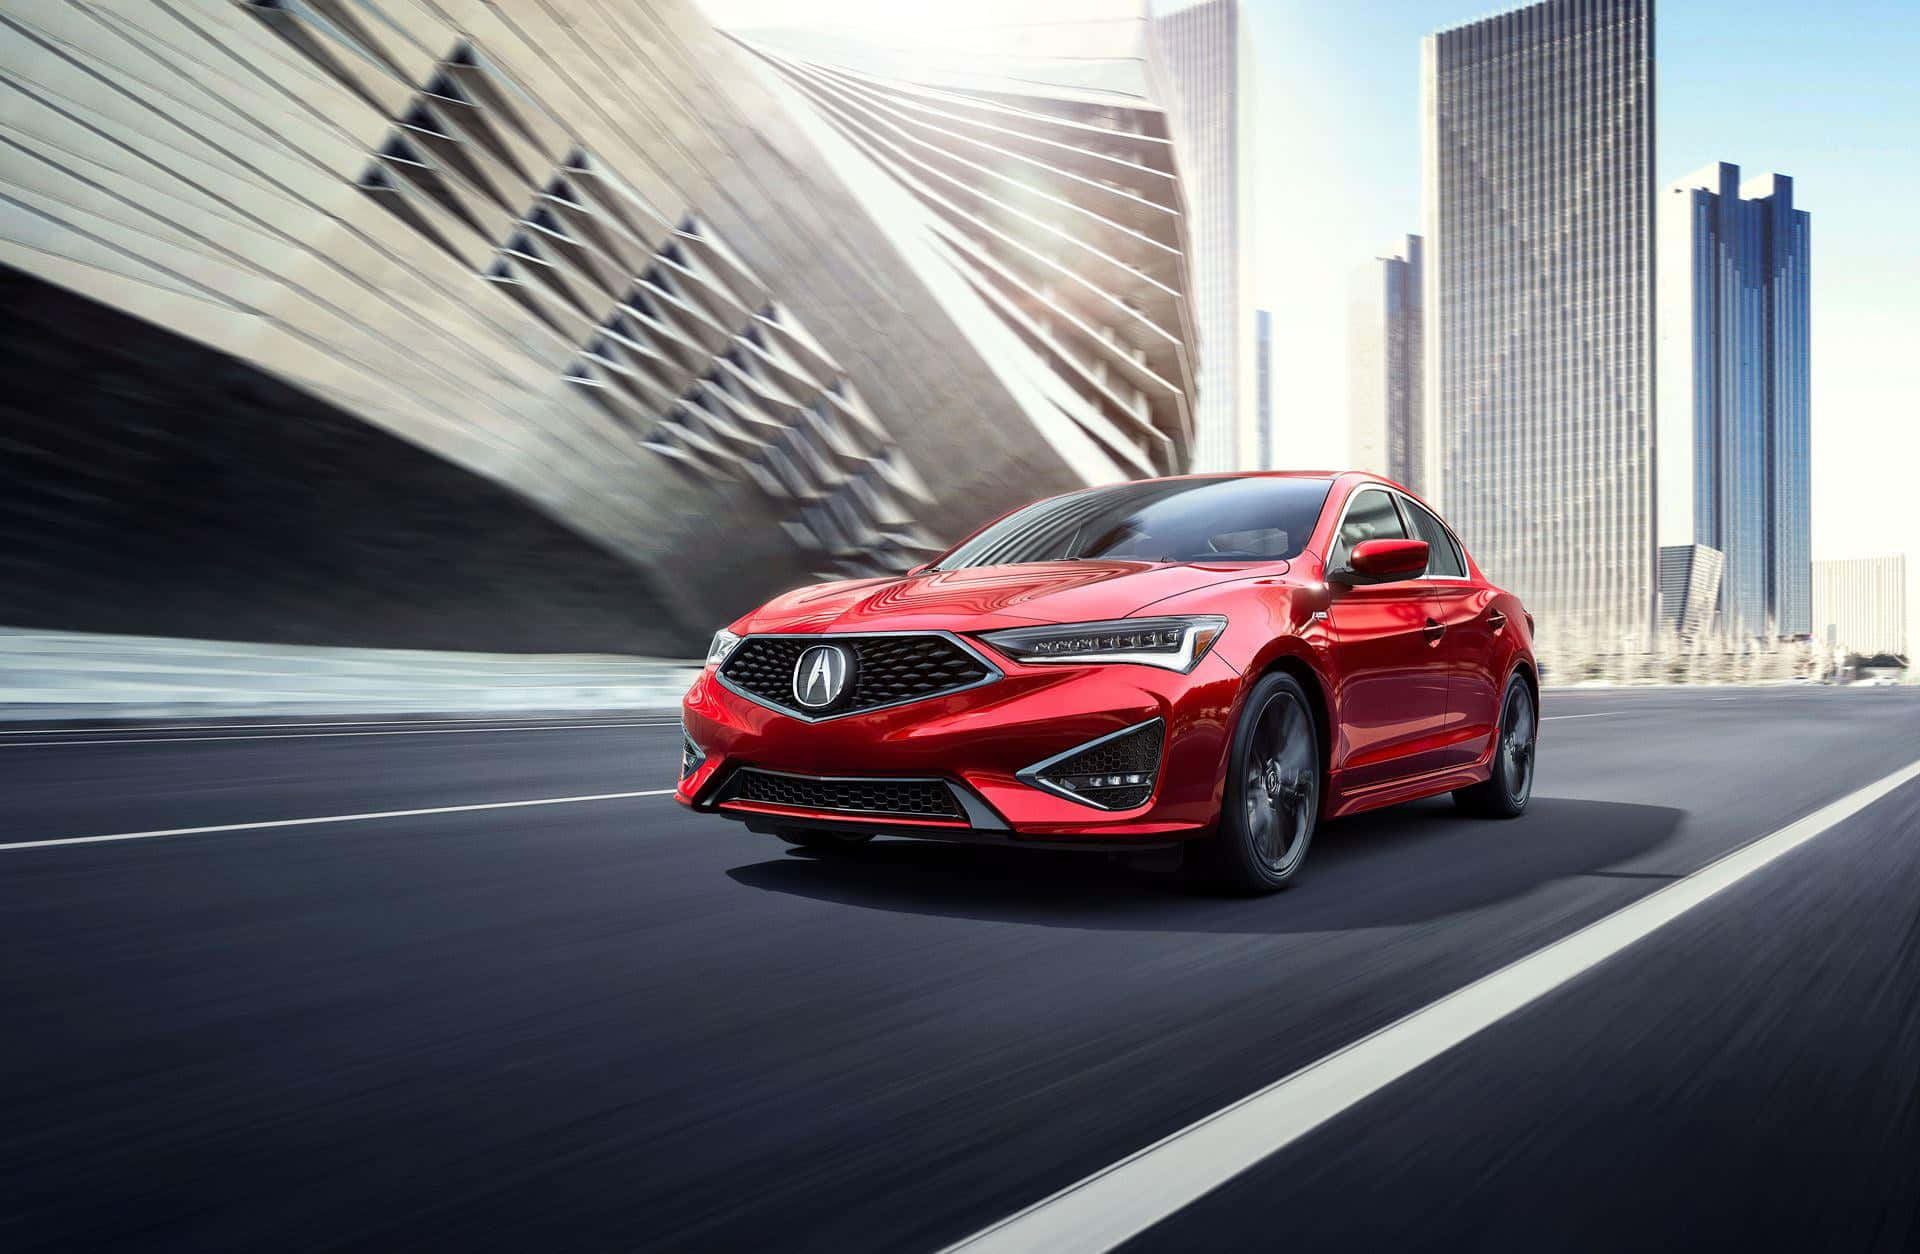 Stunning Acura ILX Exterior View Wallpaper